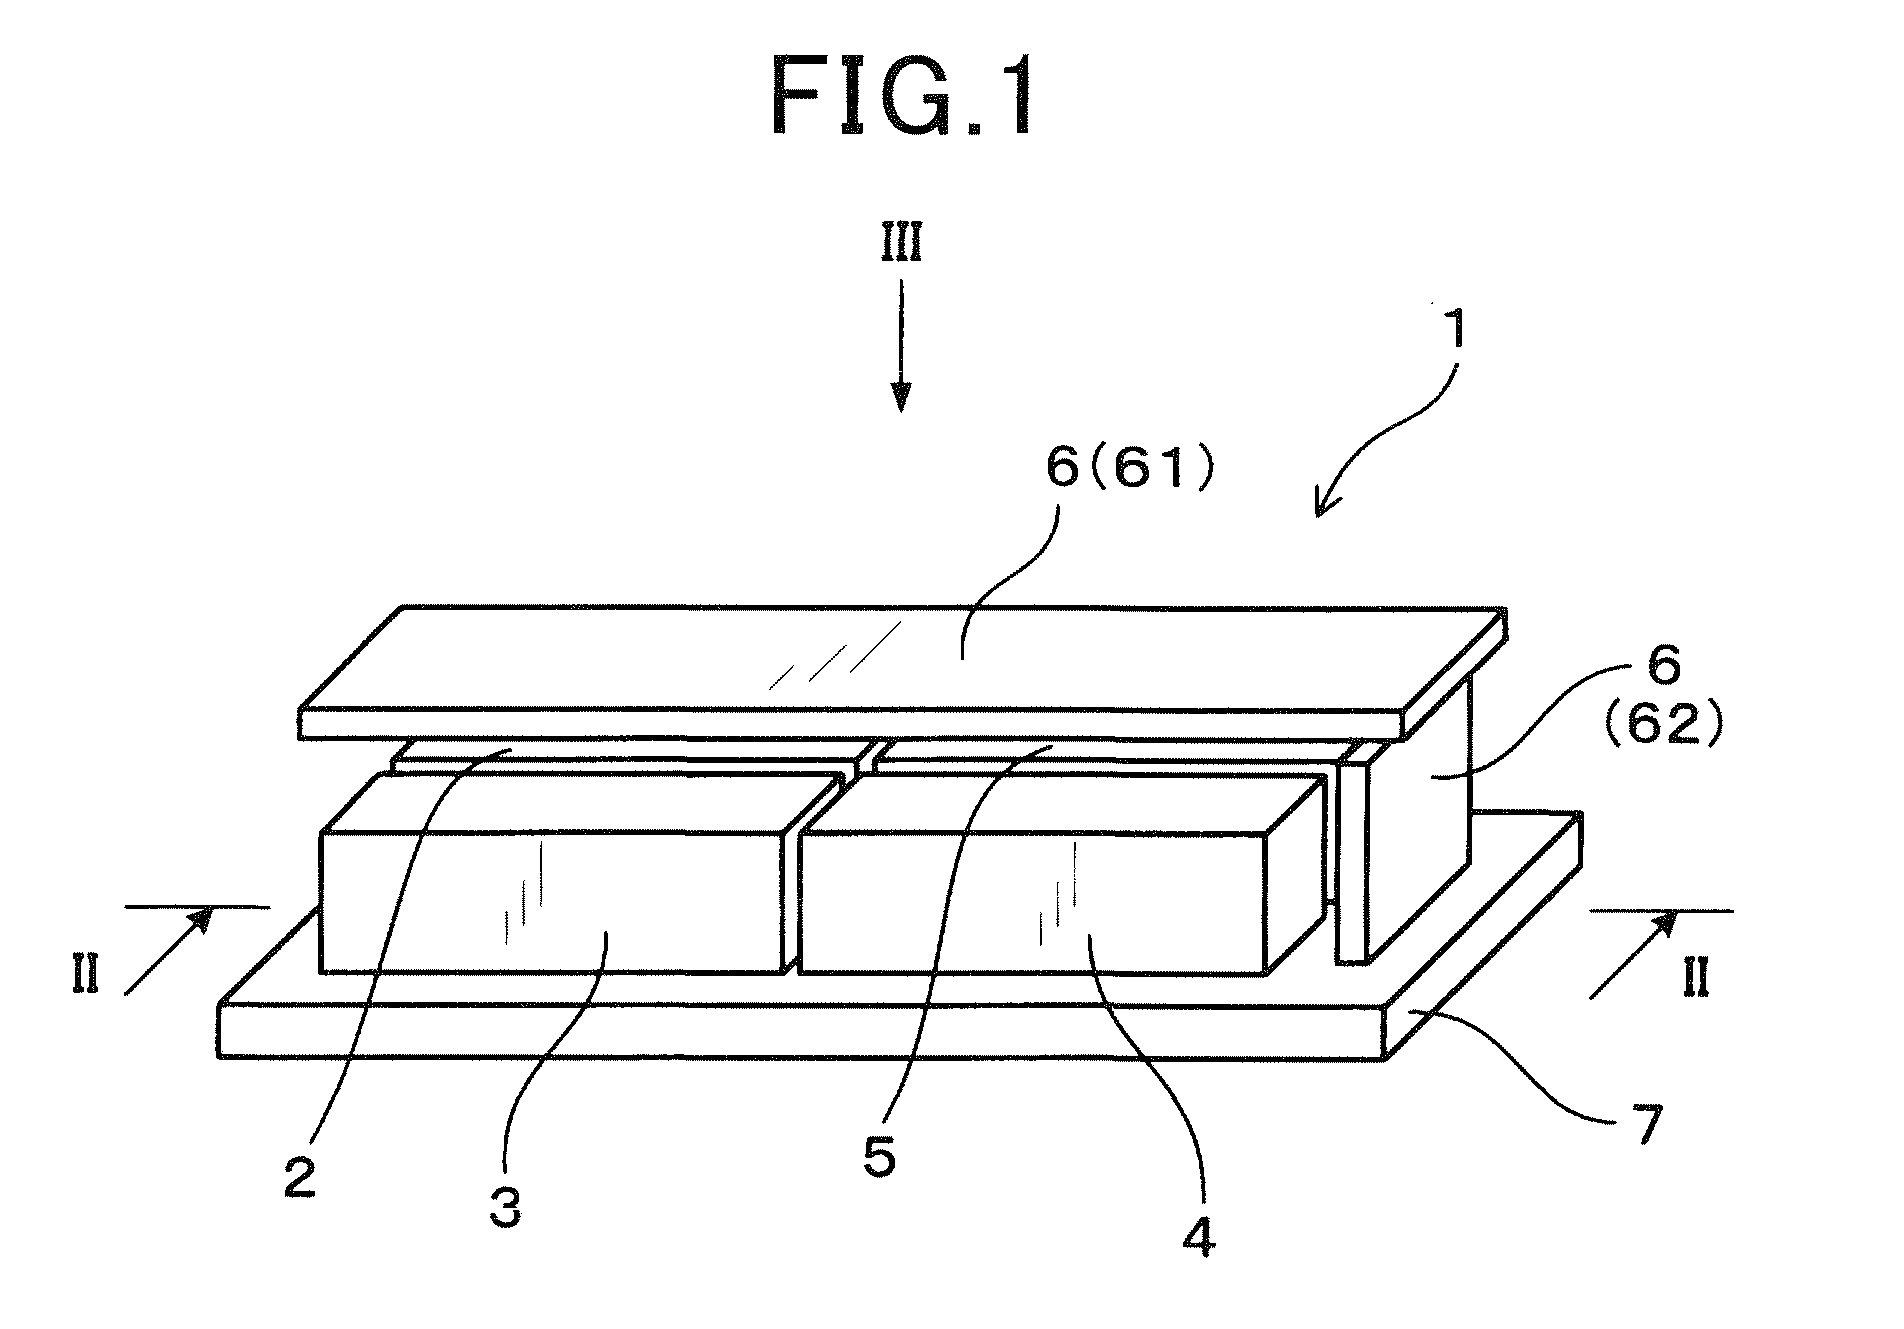 Electric power source device equipped with transformer